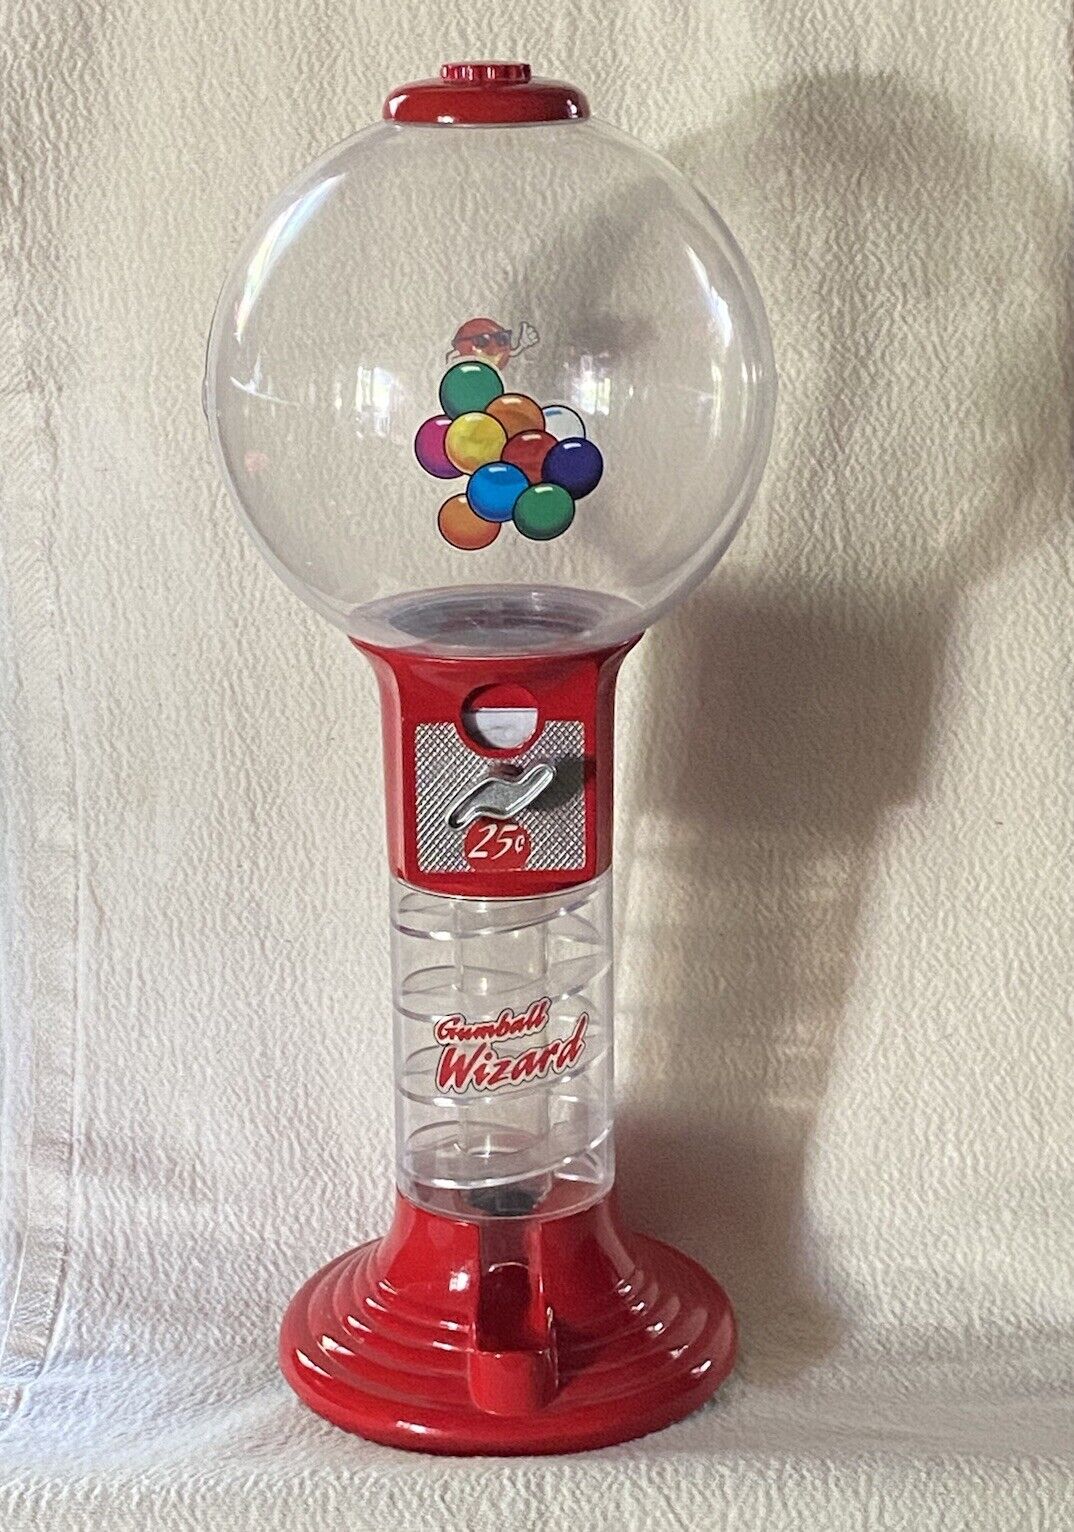 Vtg Gumball Wizard - Gumball Spiral Machine - 18” - Red  Metal and Plastic Globe